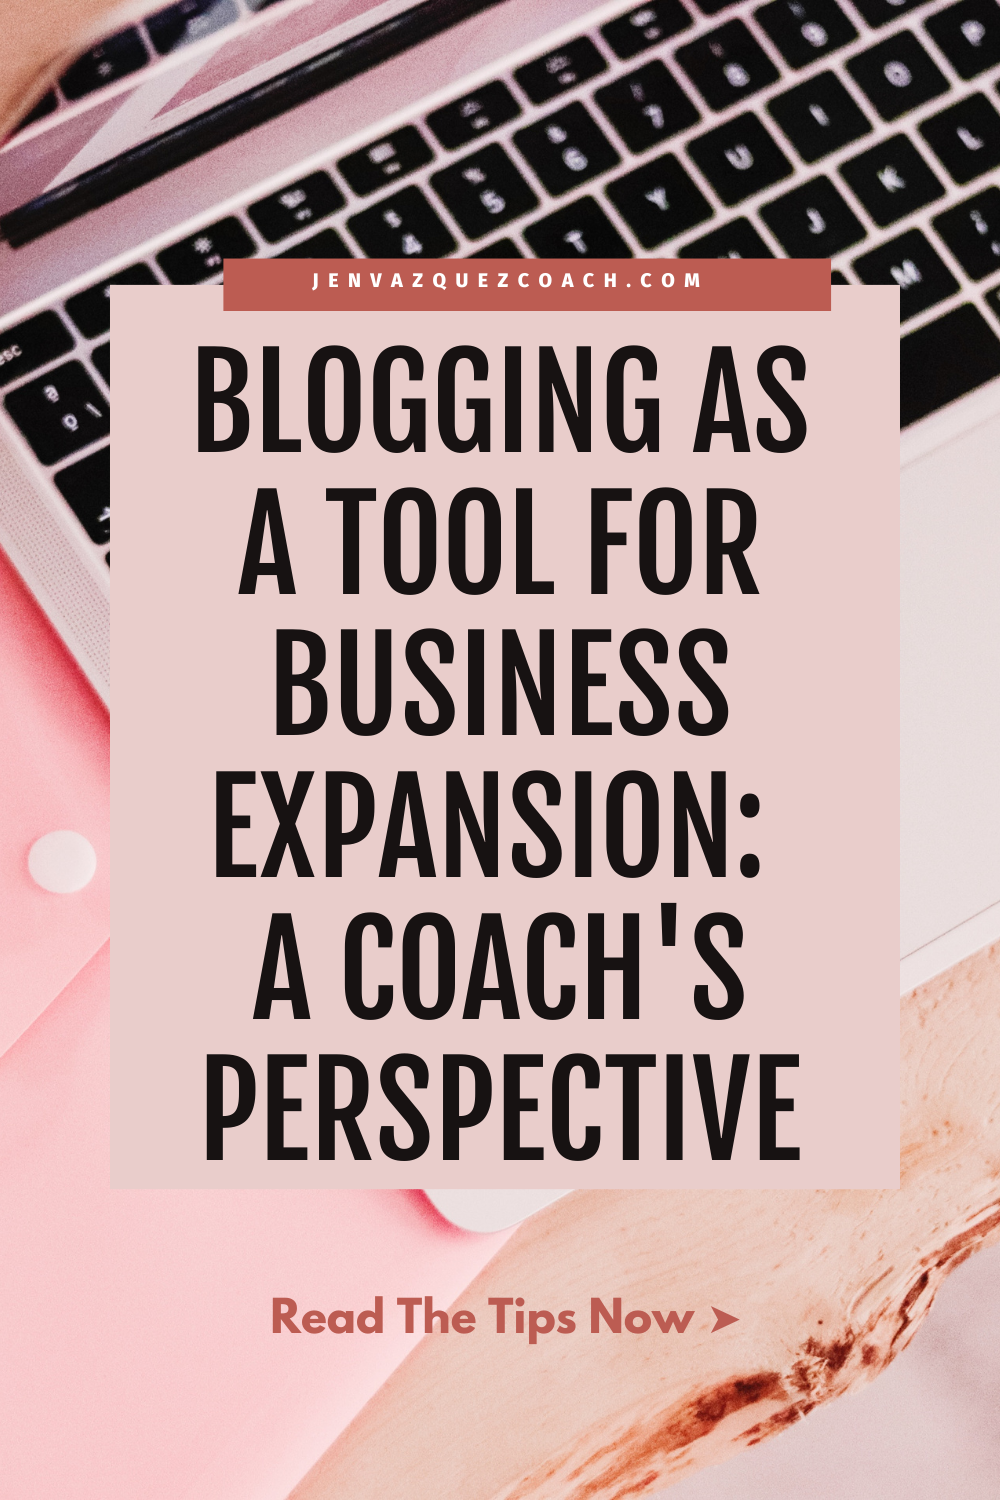 Blogging for Business Growth  A Guide for Business Coaches pins blog by Jen Vazquez Media